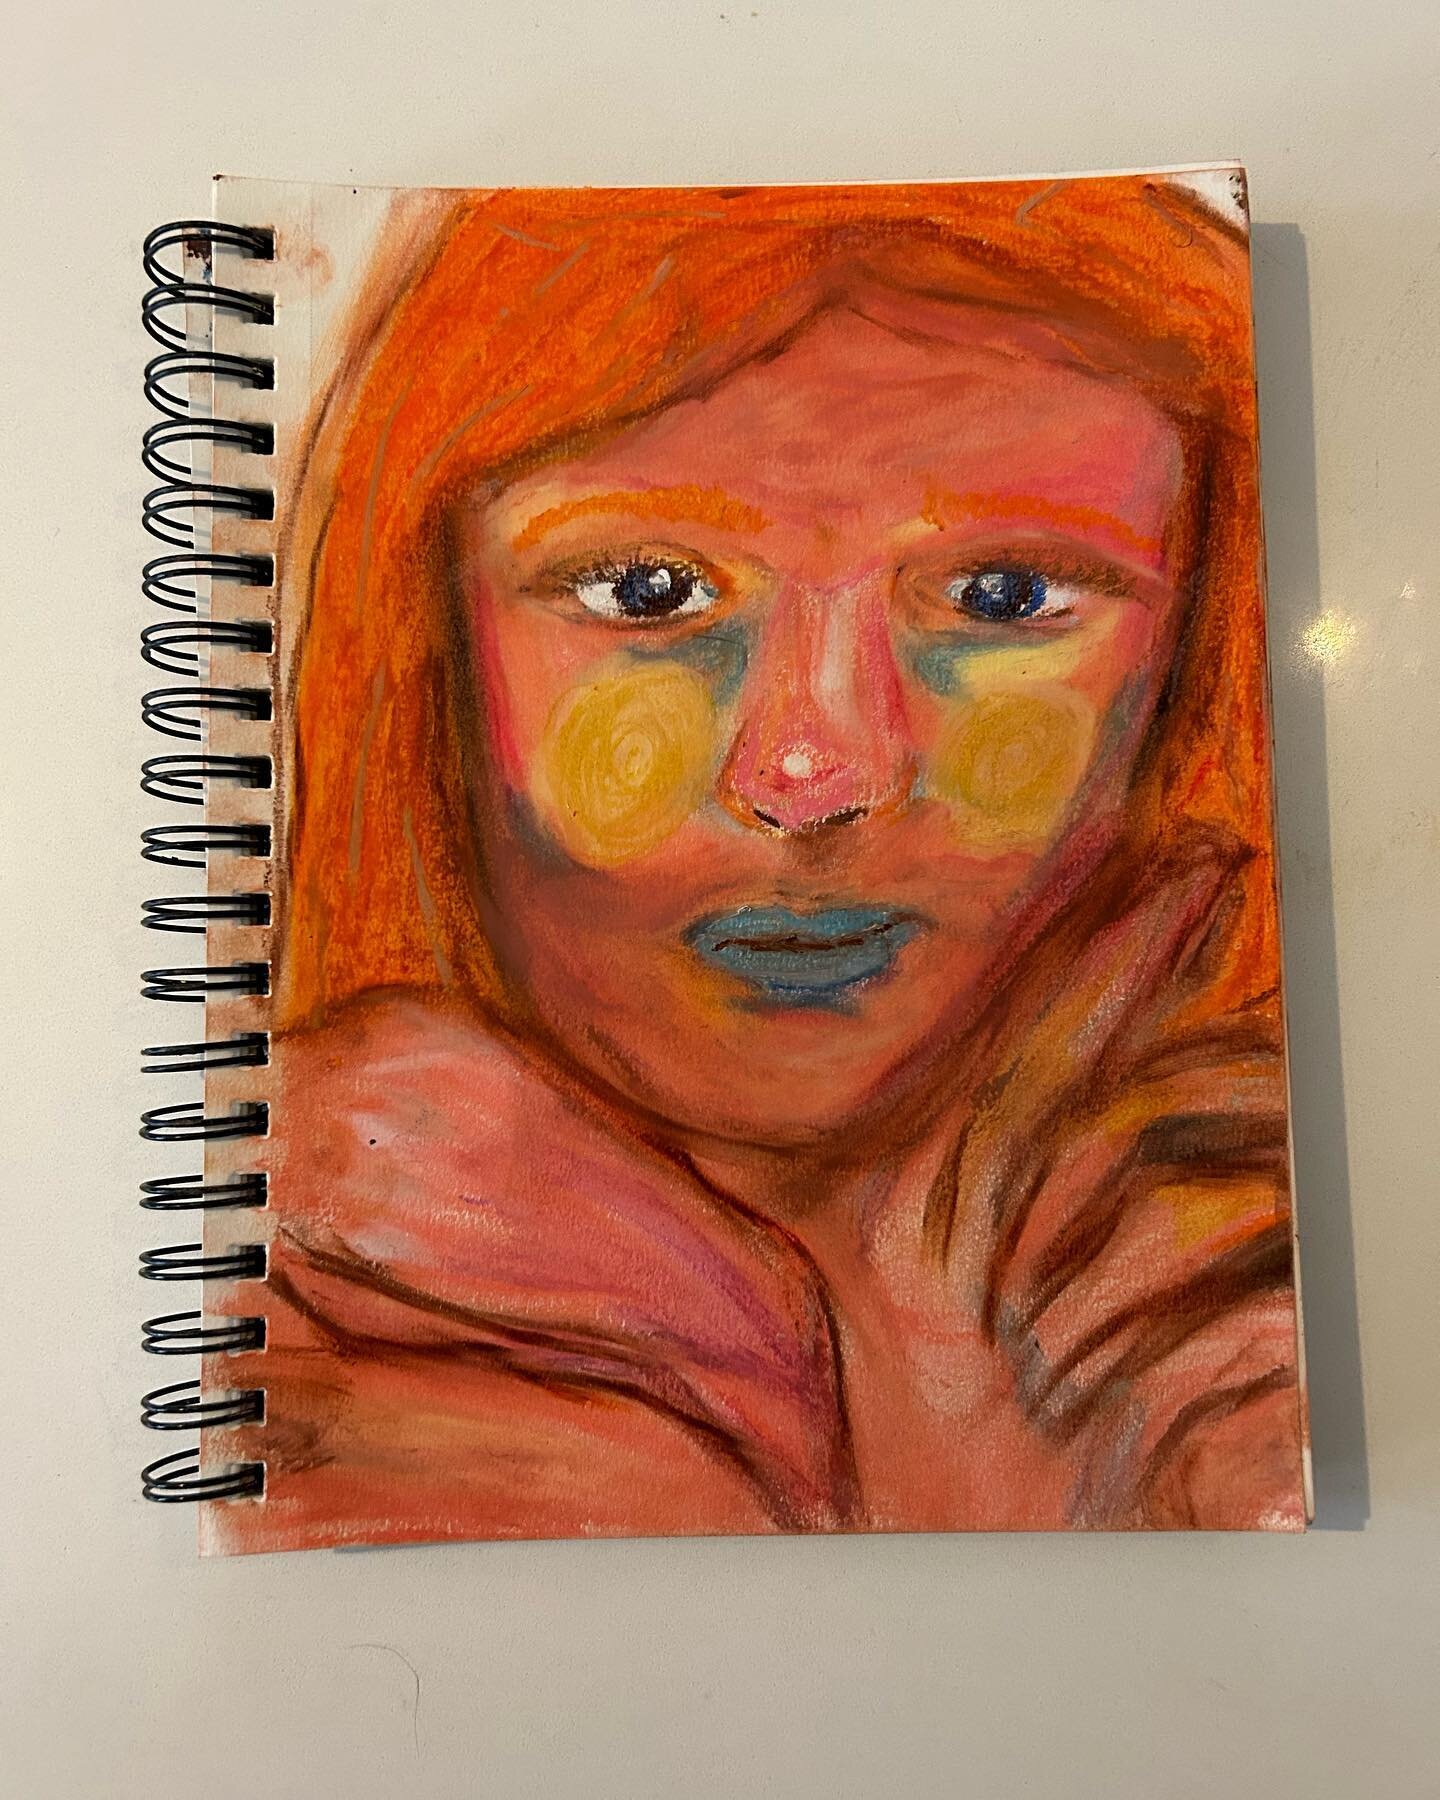 warm piece today for the first day above 70 degrees this year!🌞
oil pastels on 7x10 mixed media paper

&bull;
&bull;
&bull;
&bull;
&bull;
&bull;
&bull;
&bull;
&bull;
#oilpastel #artist #art #artistsoninstagram #artgallery #artoftheday #oil #pastel #